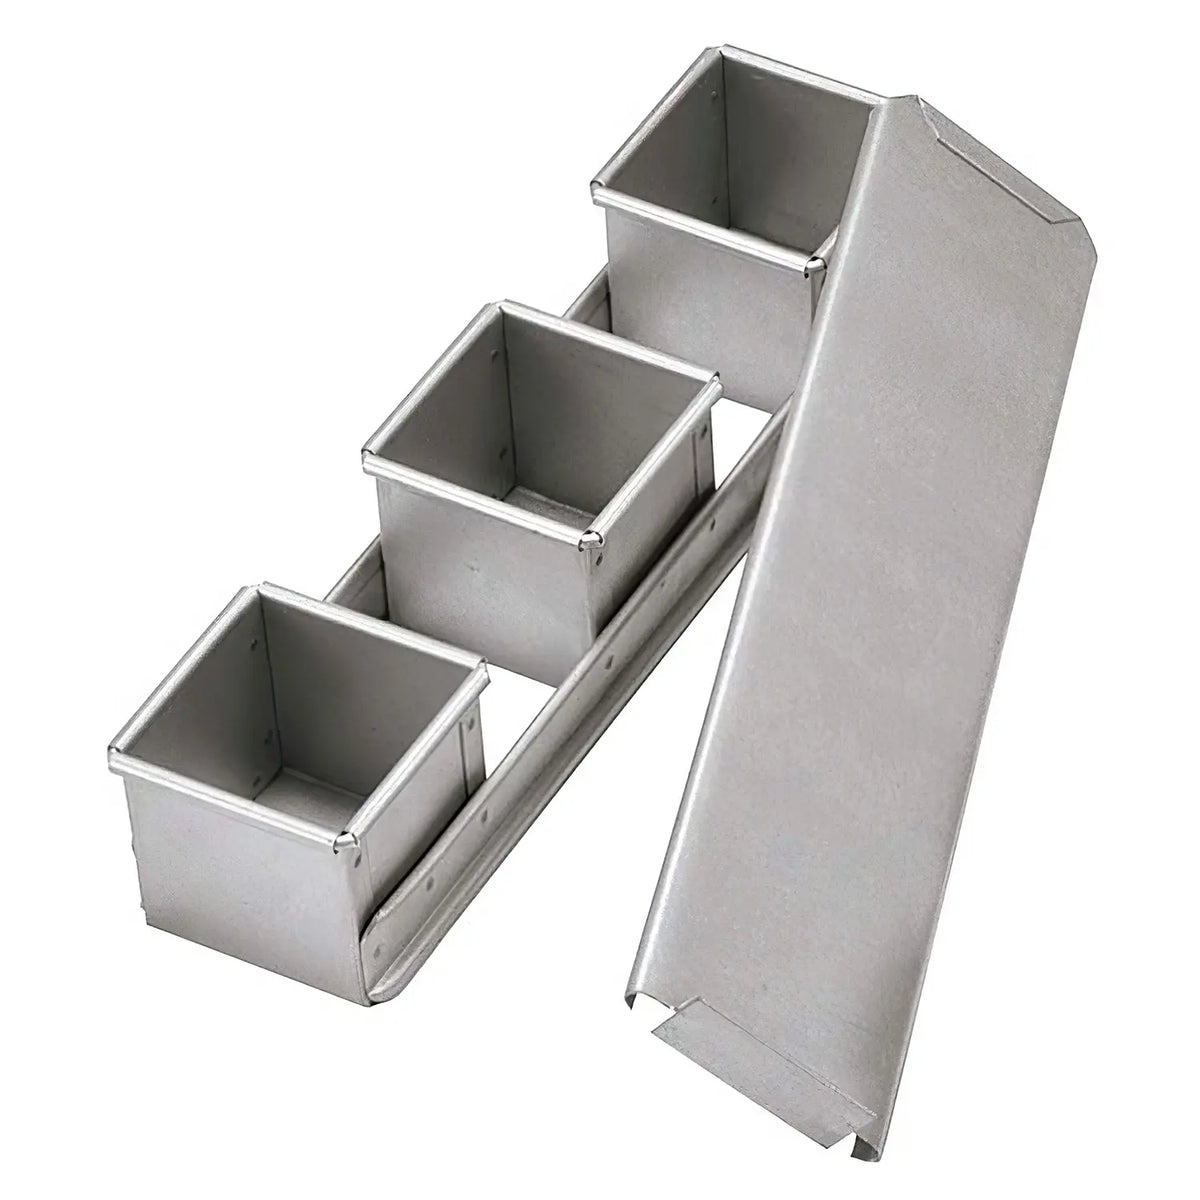 EBM Altaite Linked Mini Loaf Pan Set of 3